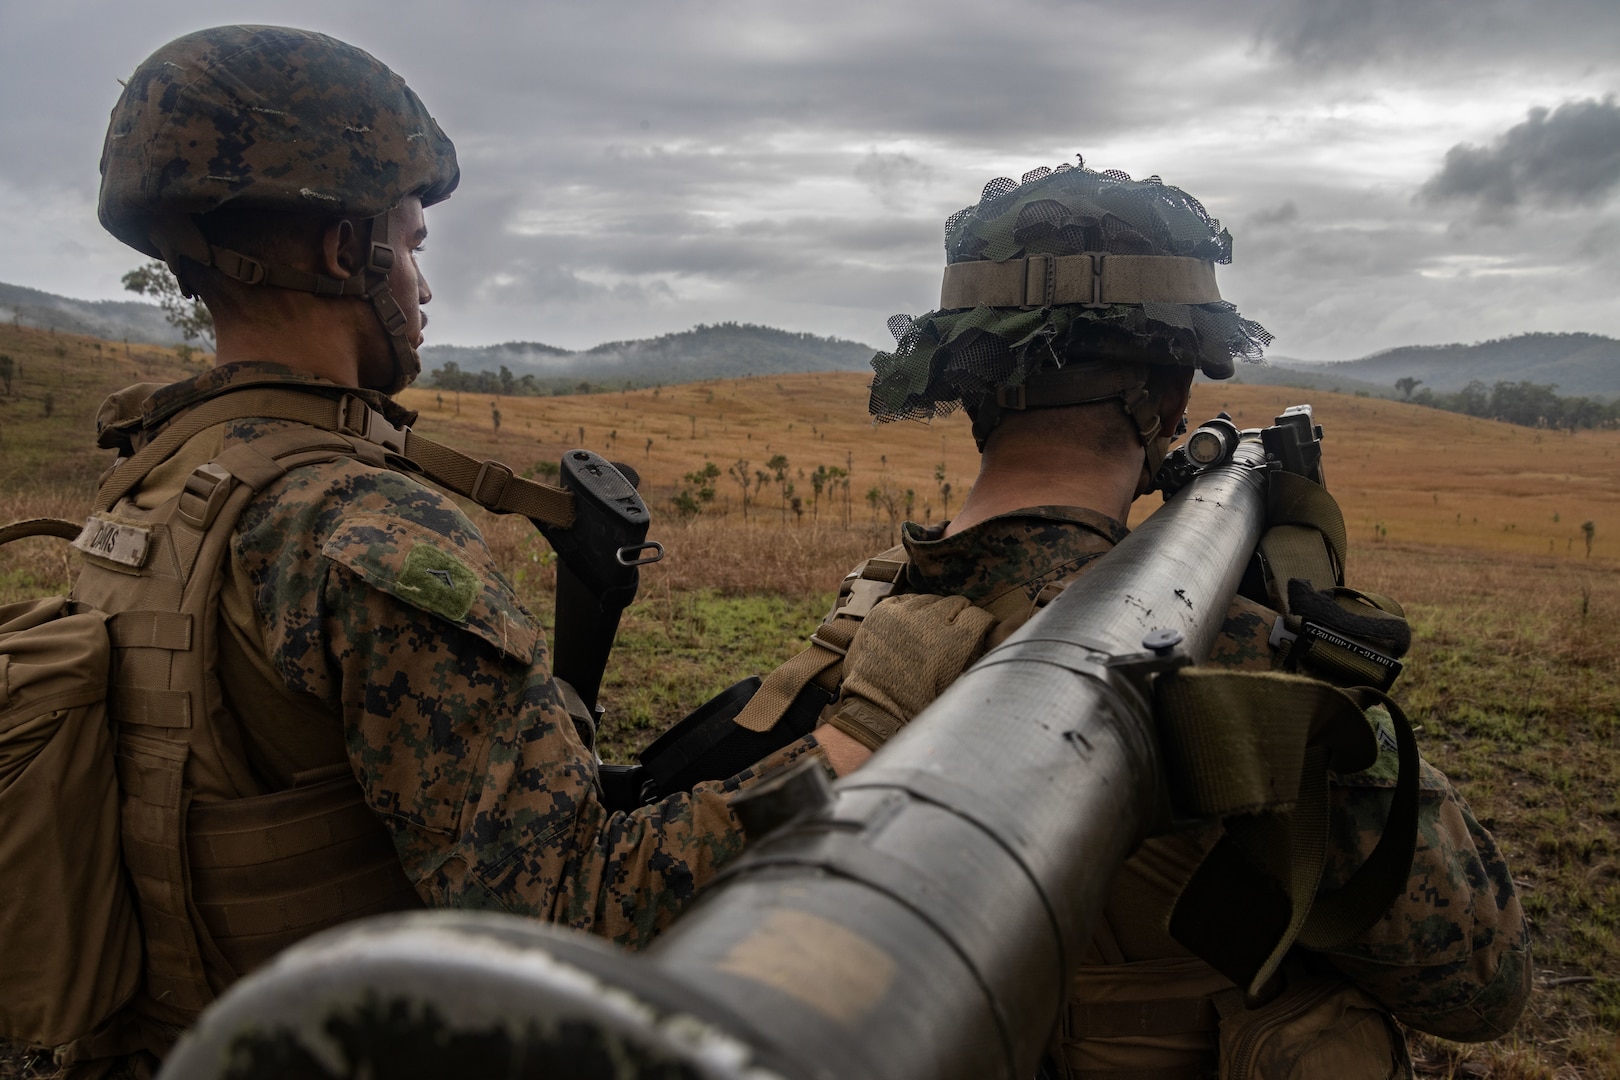 U.S. Marine Corps Lance Cpl. Frank Davis III, left, and Cpl. Simon Li, both low altitude air defense gunners with Marine Medium Tiltrotor Squadron 265 (Rein.), 31st Marine Expeditionary Unit, aim with an FIM-92E stinger missile system during a forward arming and refueling point exercise at Shoalwater Bay Training Area, Australia, July 4, 2023. Marines with 2d LAAD provided a defensive posture for the FARP from aerial threats as part of an expeditionary advanced base of operations. The 31st MEU is operating aboard ships of the America Amphibious Ready Group in the 7th Fleet area of operations to enhance interoperability with allies and partners and serve as a ready response force to defend peace and stability in the Indo-Pacific region. (U.S. Marine Corps photo by Cpl. Christopher R. Lape)